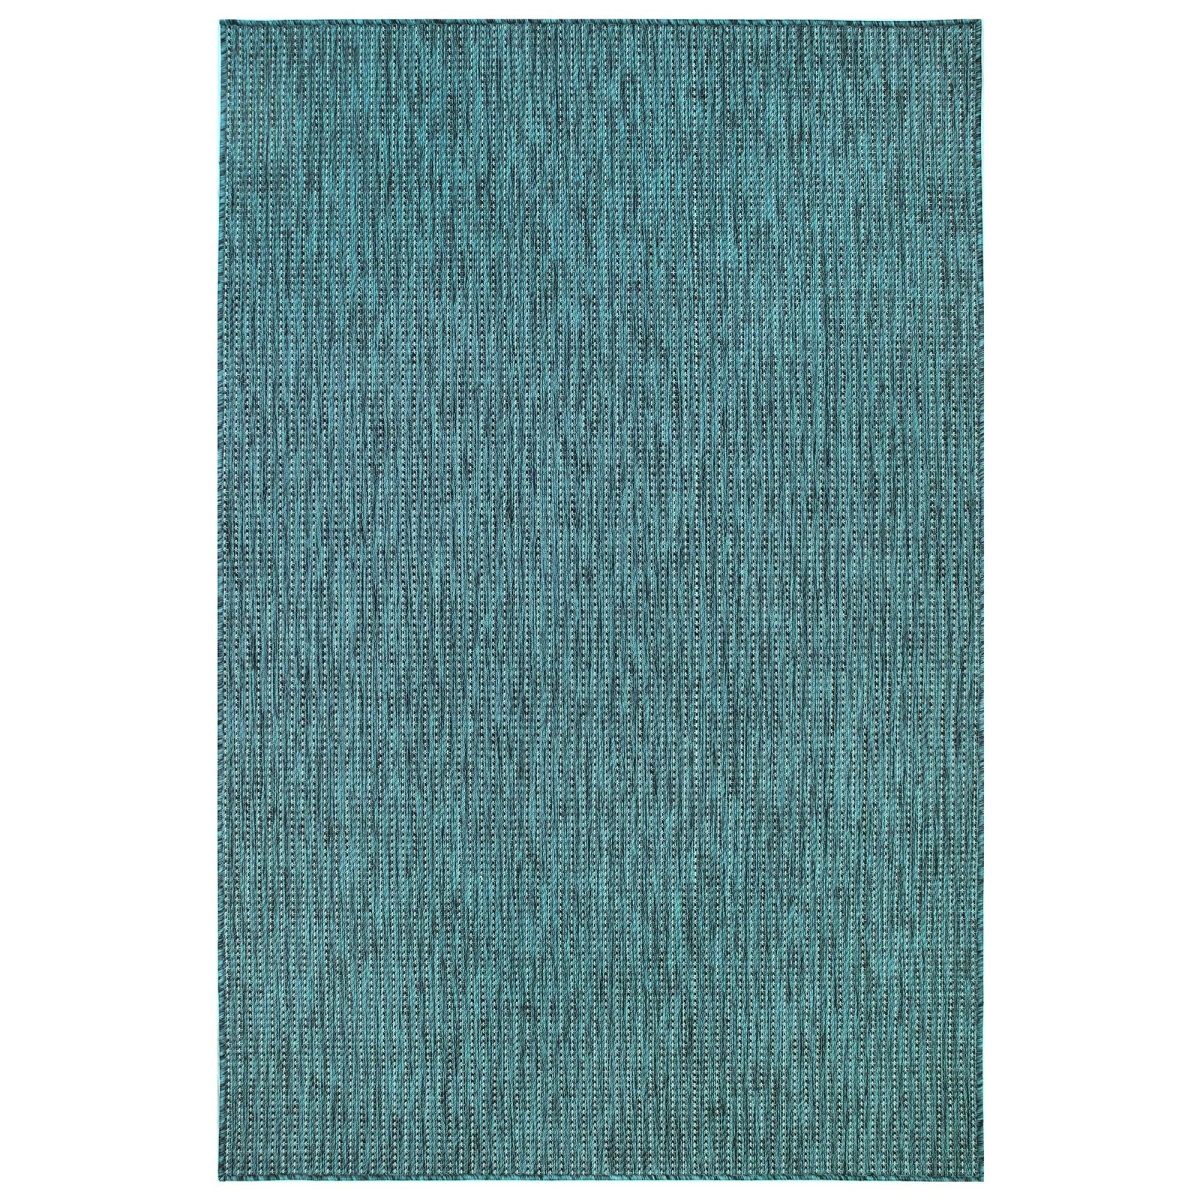 Trans-ocean Imports Cre45842294 39 In. X 59 In. Liora Manne Carmel Texture Stripe Indoor & Outdoor Wilton Woven Rectangle Rug - Teal